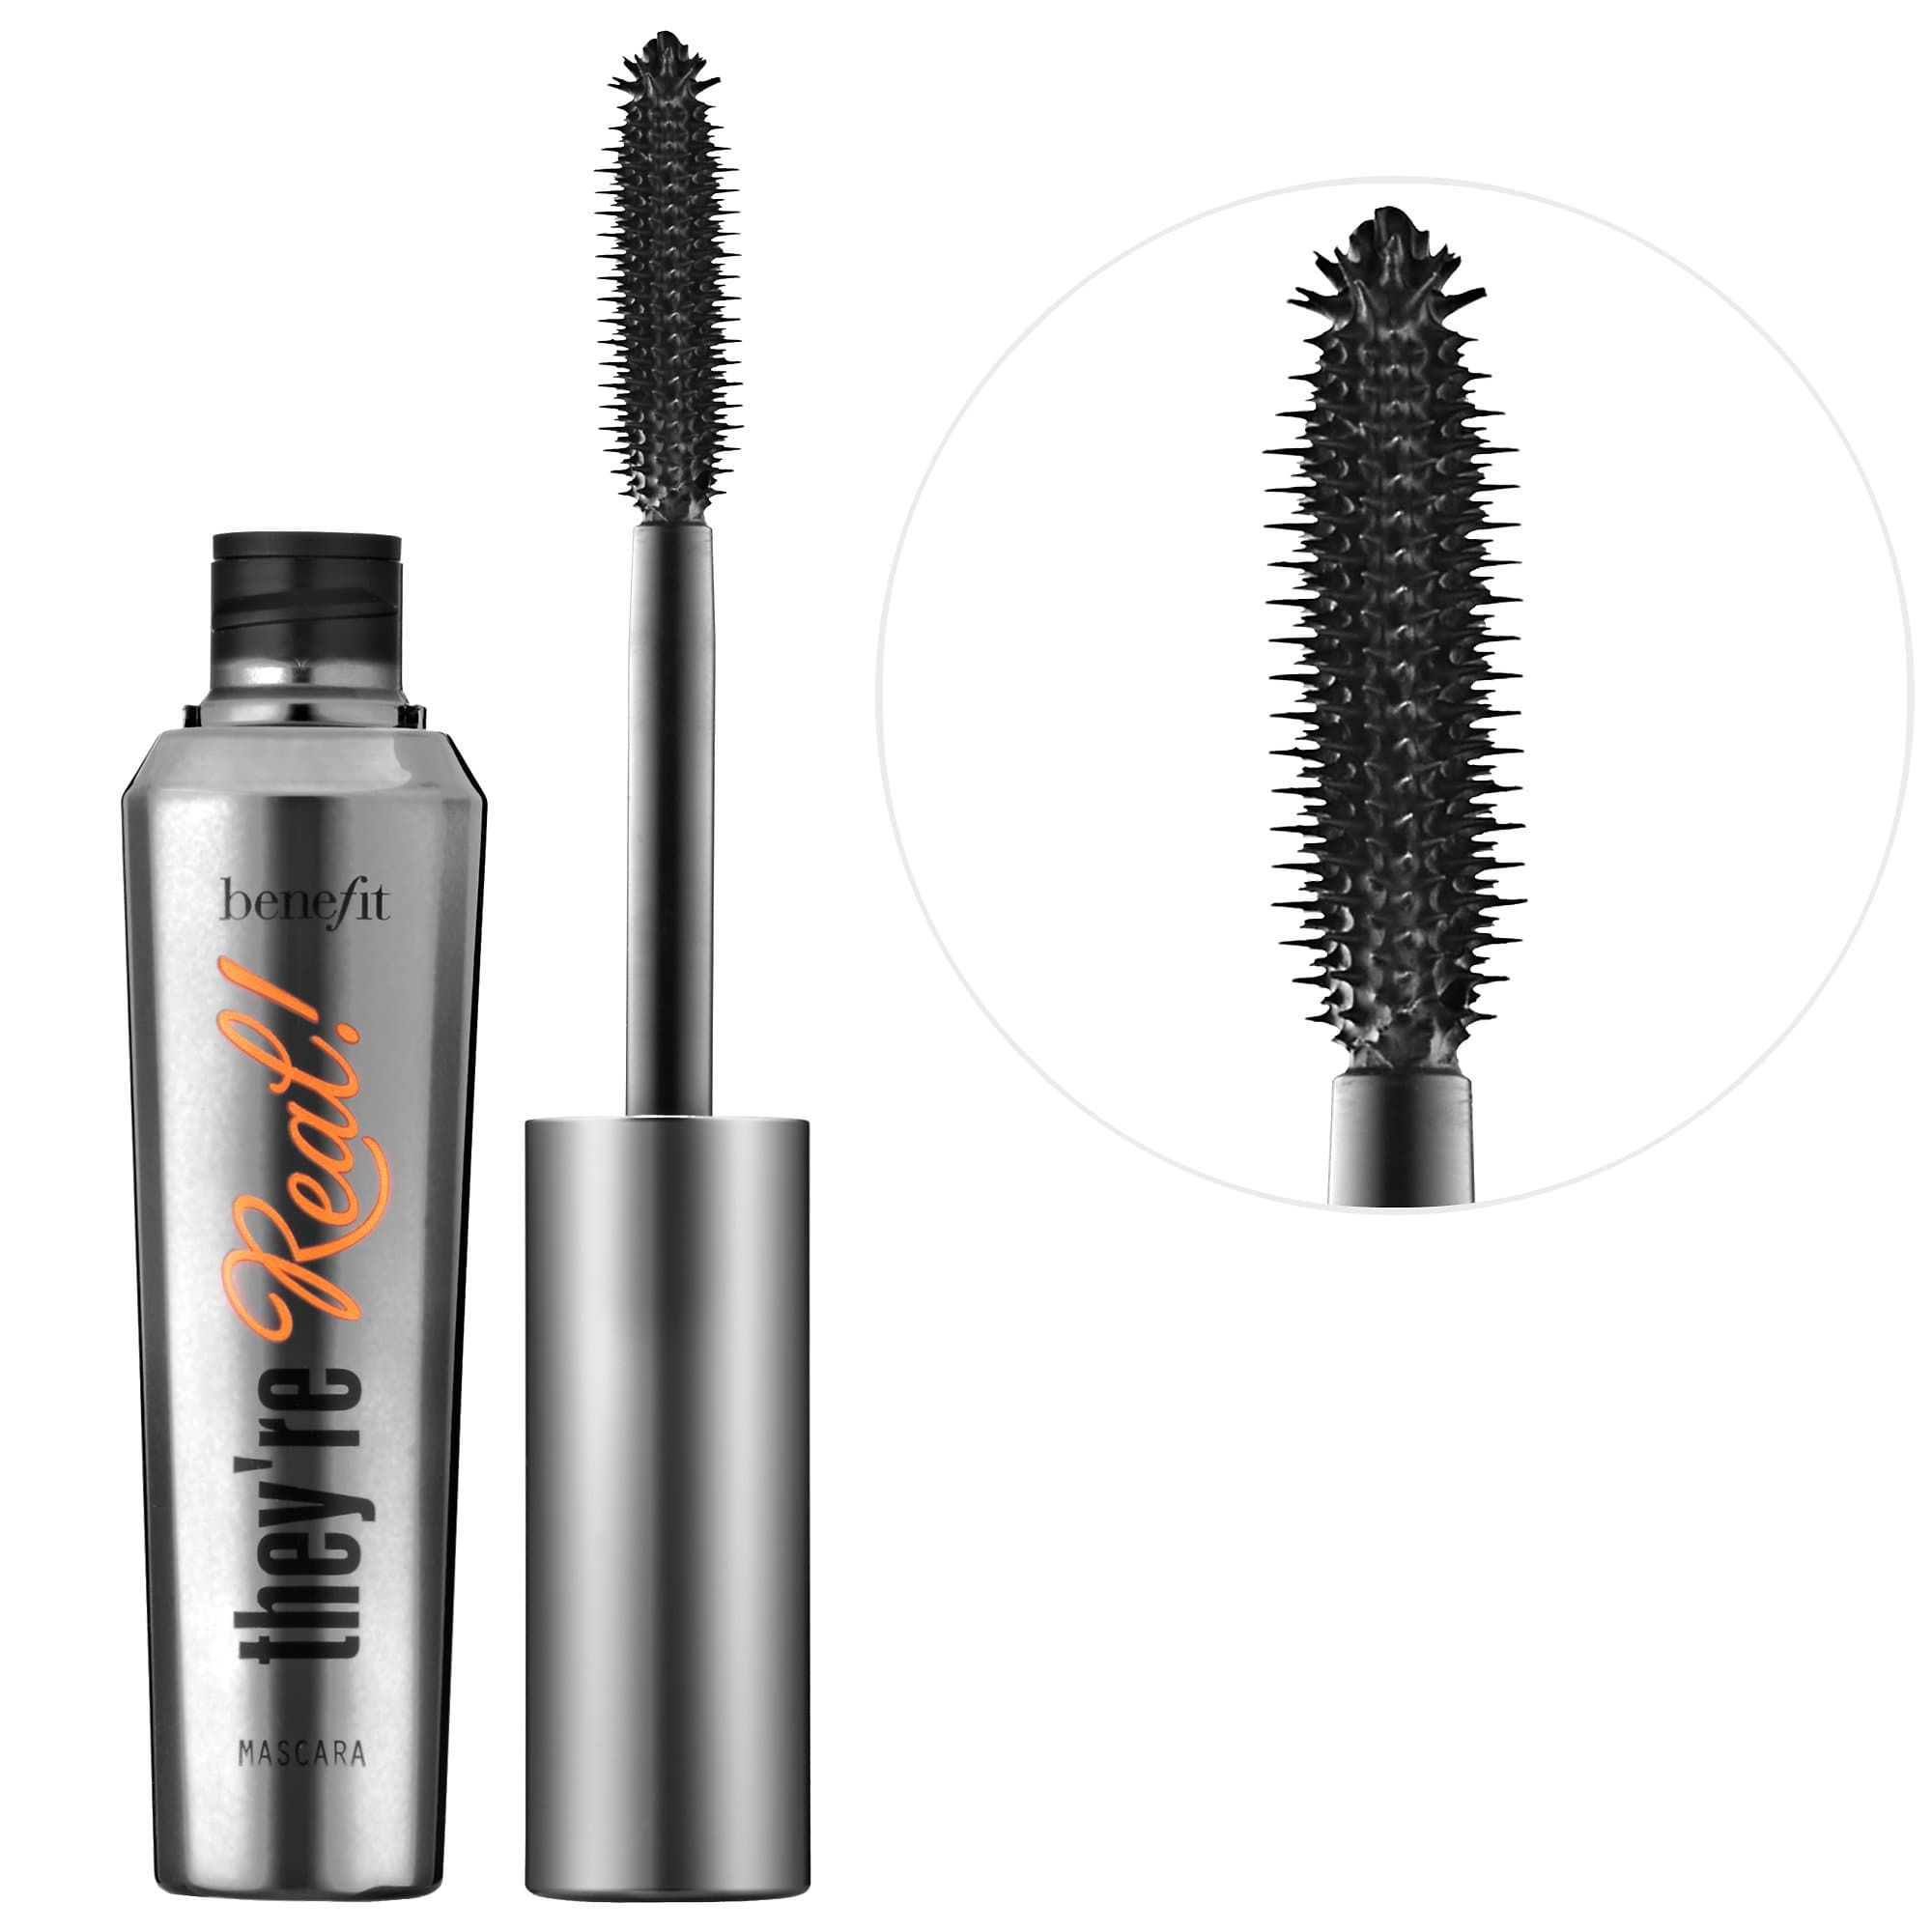 Best overall: They’re Real! Lengthening & Volumizing Mascara